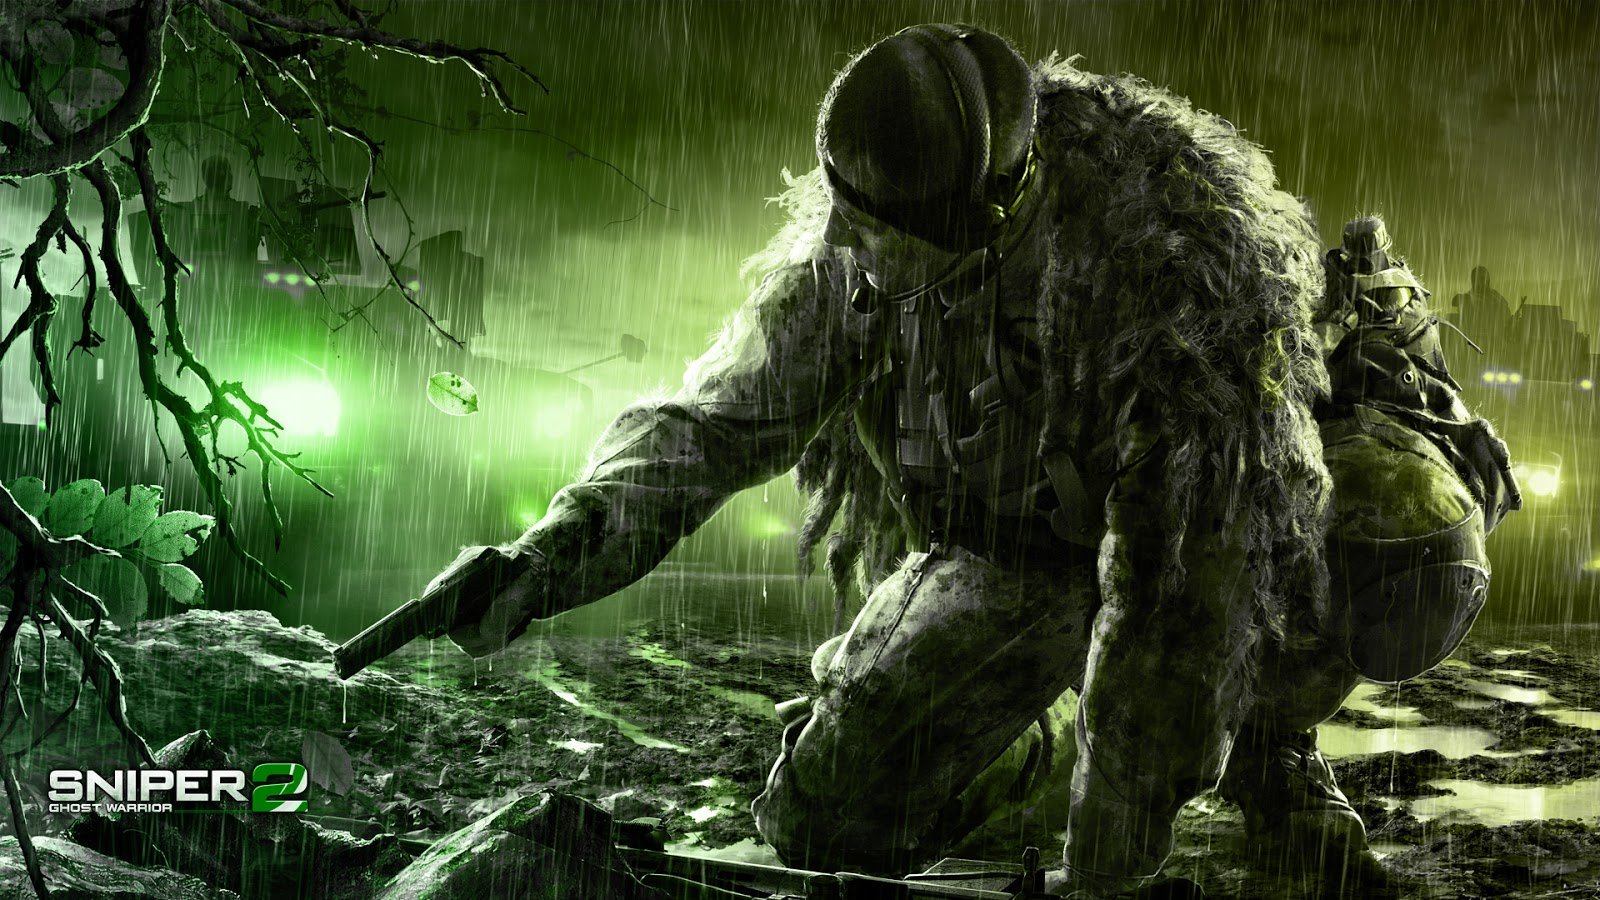 HD WALLPAPERS Sniper Ghost Warrior 2 HD wallpapers